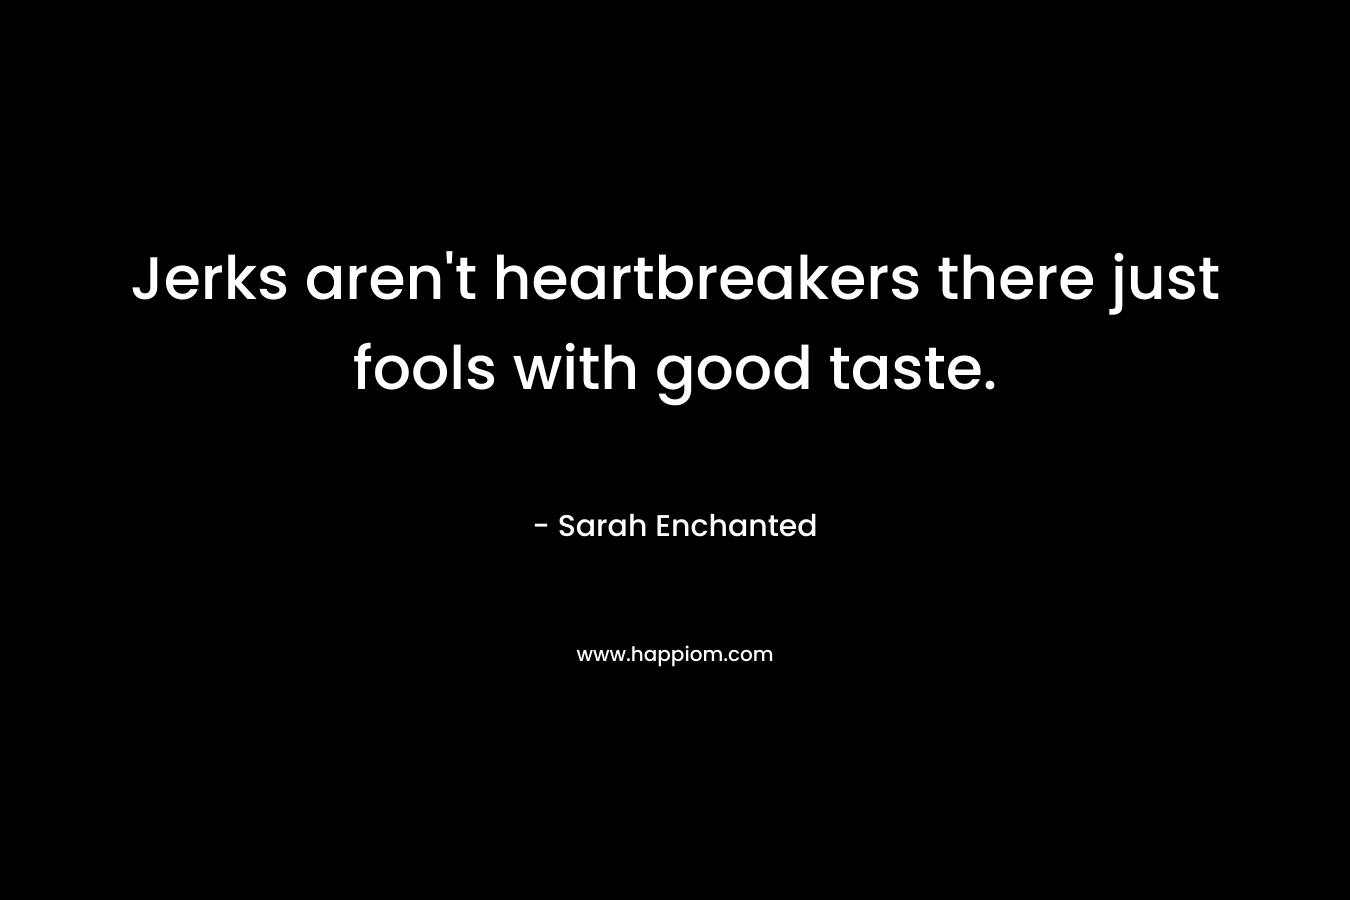 Jerks aren’t heartbreakers there just fools with good taste. – Sarah Enchanted